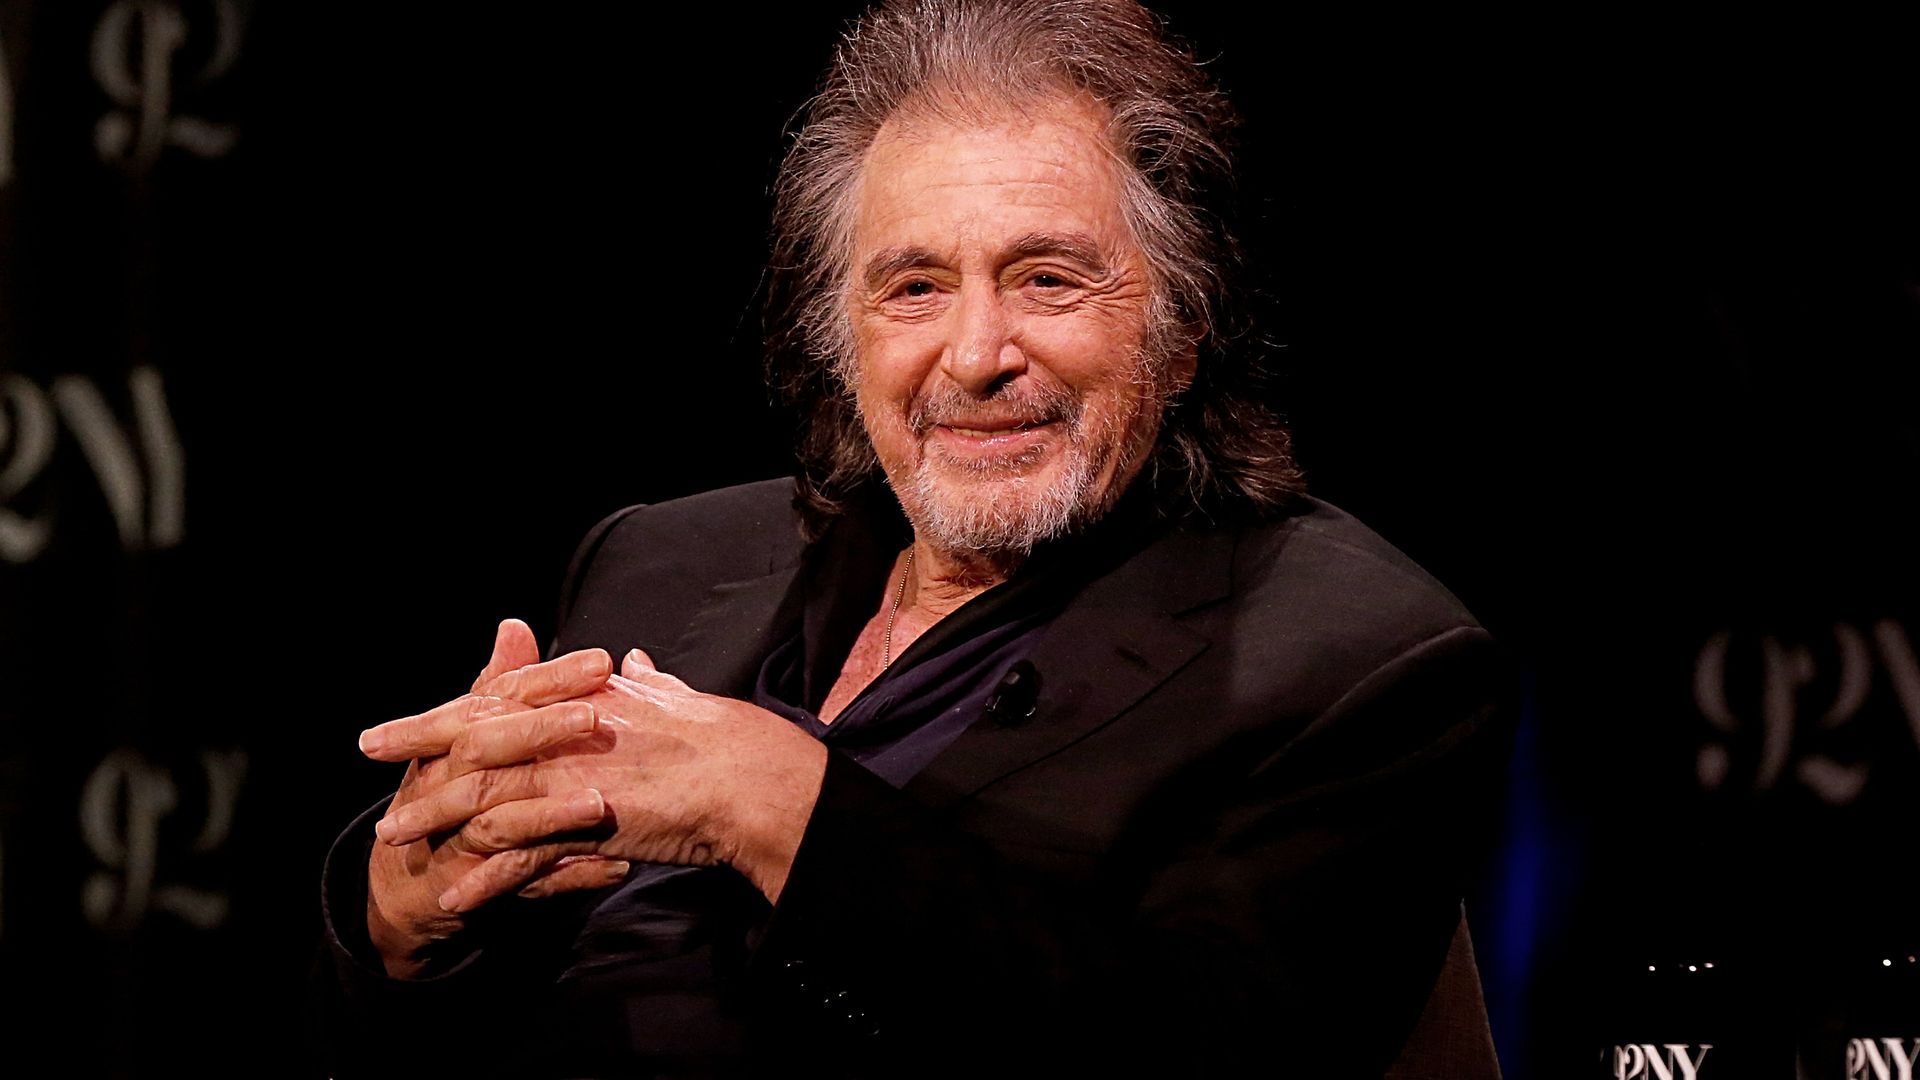 Al Pacino attends a conversation with Al Pacino at The 92nd Street Y, New York on April 19, 2023 in New York City. (Photo by Dominik Bindl/Getty Images)